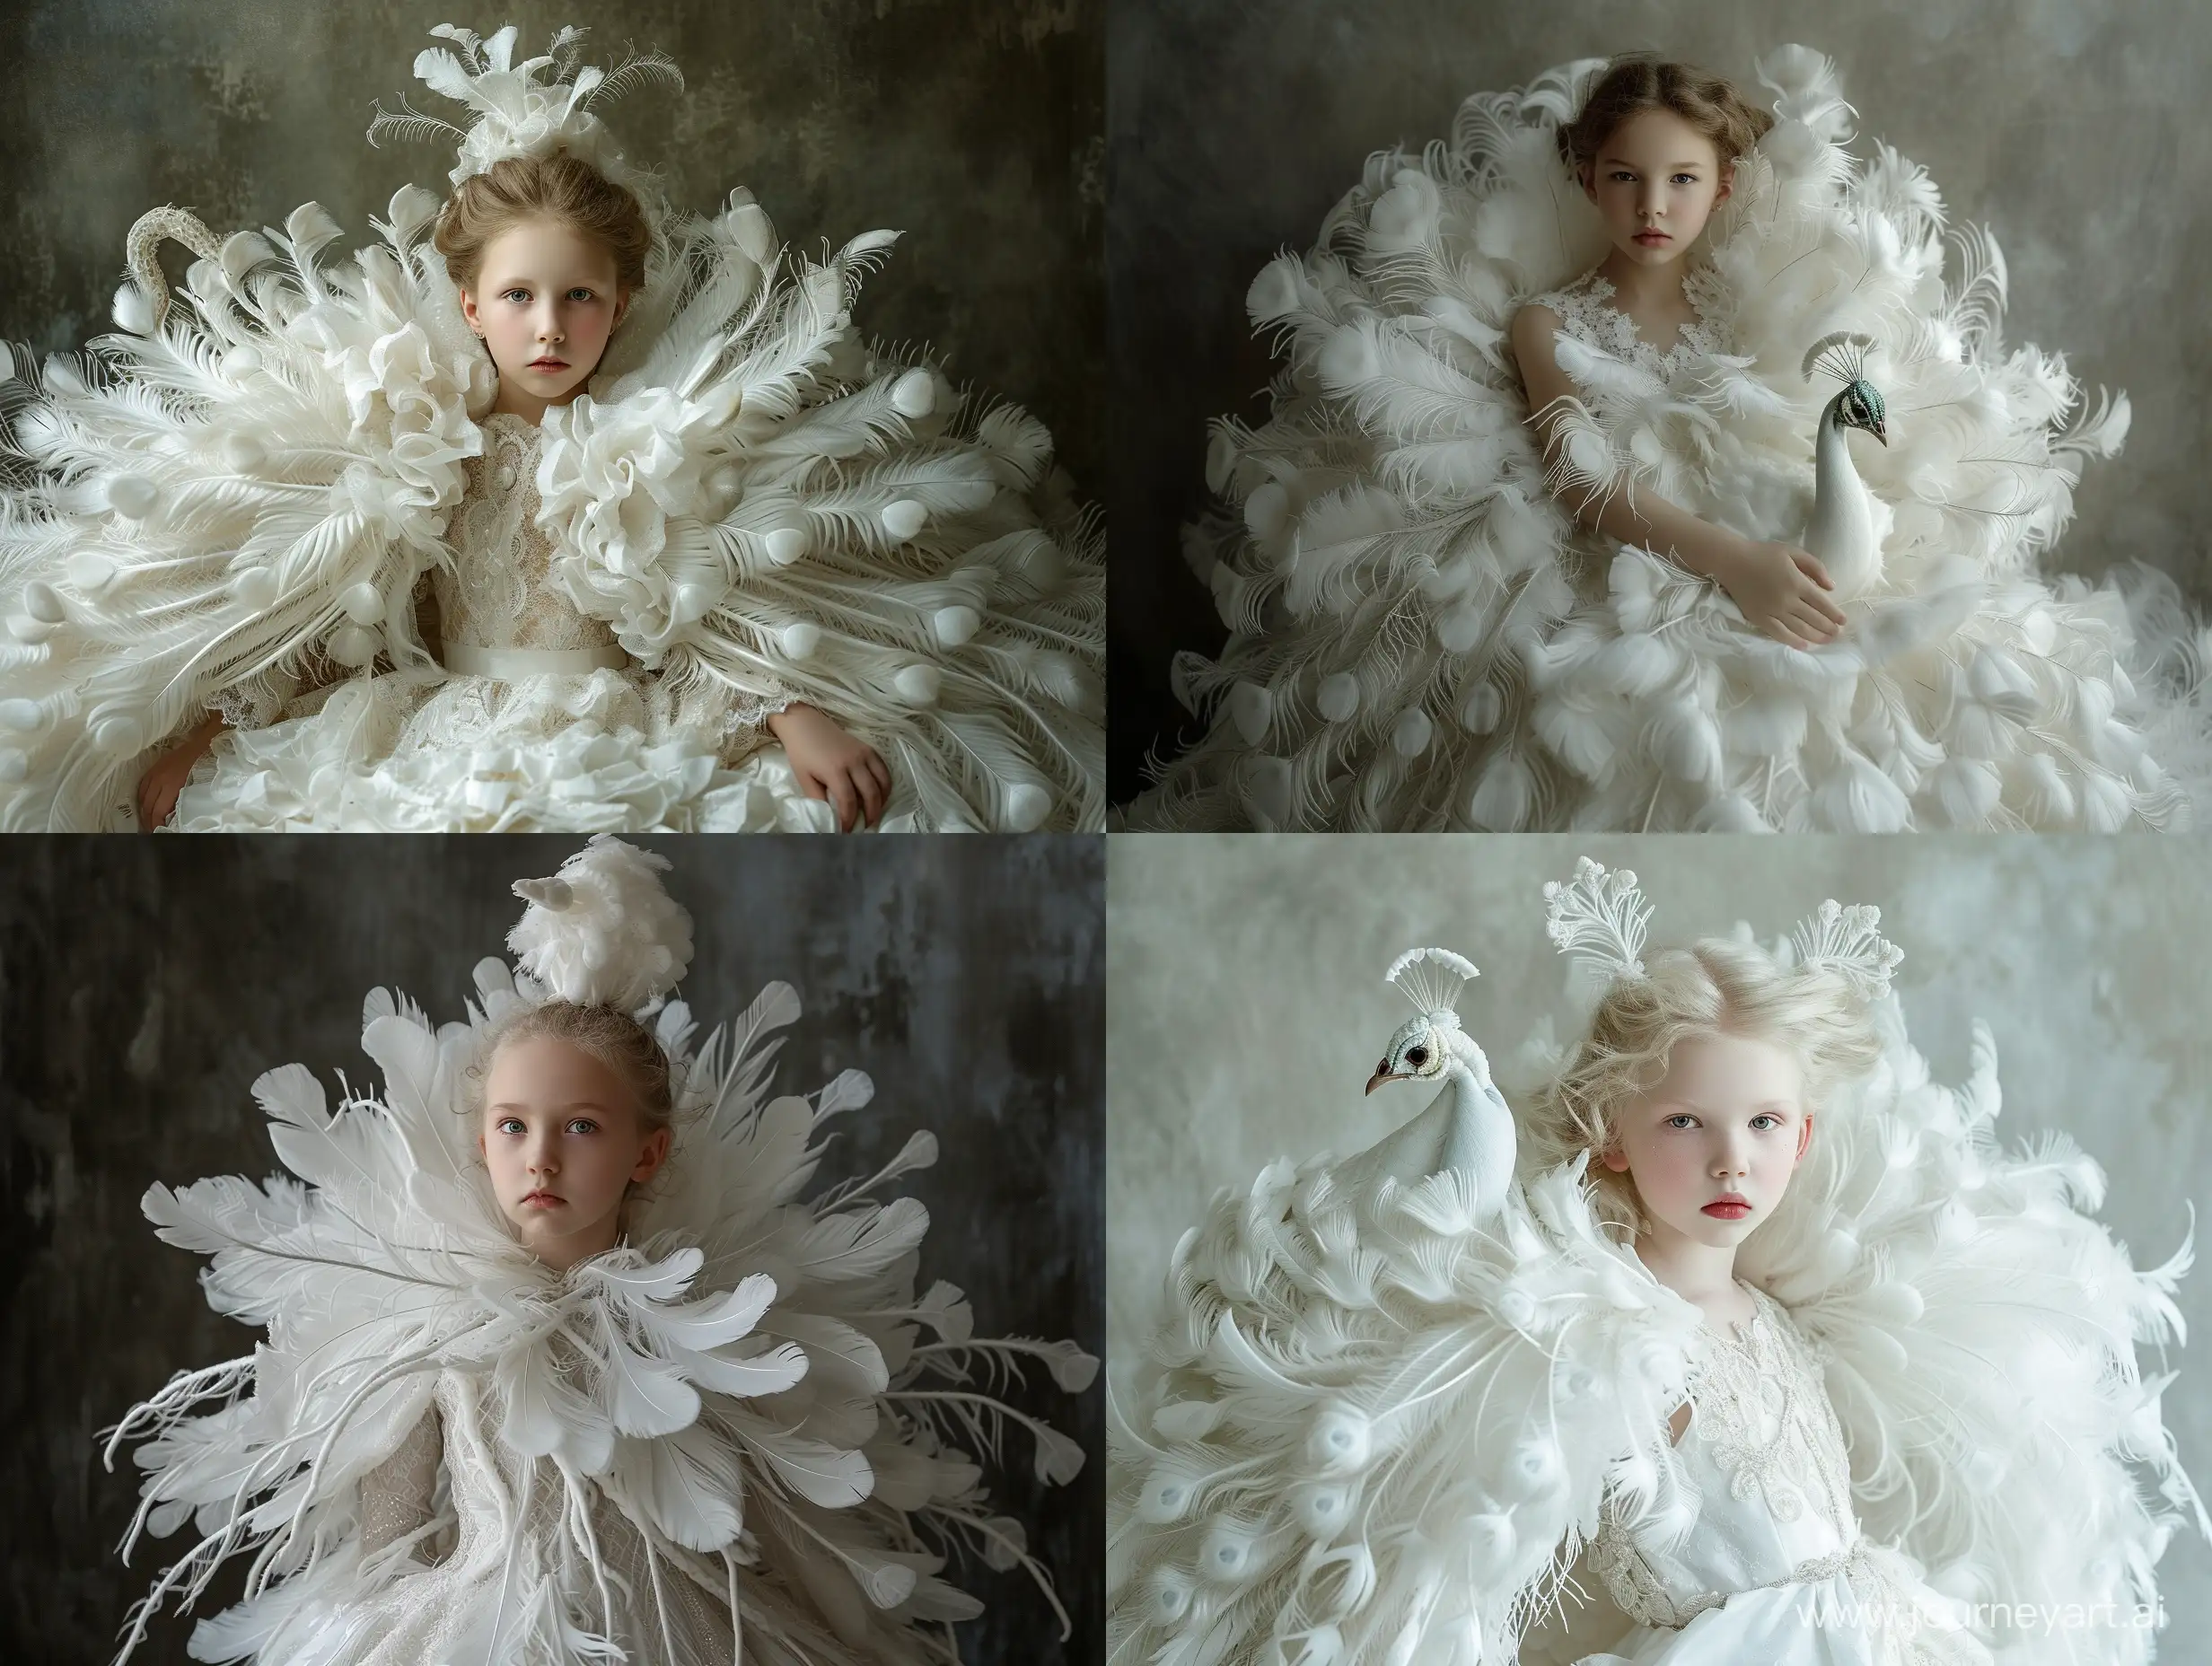 12 year old Slavic girl wearing a dress made of white peacock, fine penn style, white, natural inspiration, elegant formal, organic sculpture, aesthetic movement, oriental russian style, portrait photography by timwalker, fashinon editor, realistic portraits are all, 4k Army of me. 12 yo girl from film hugs dad. Dark éditorial photography of 12yo little girl for  magazine. Dark glamour, figura serpentina, gothcore dystopian weird edgy vibes, playfully Dark